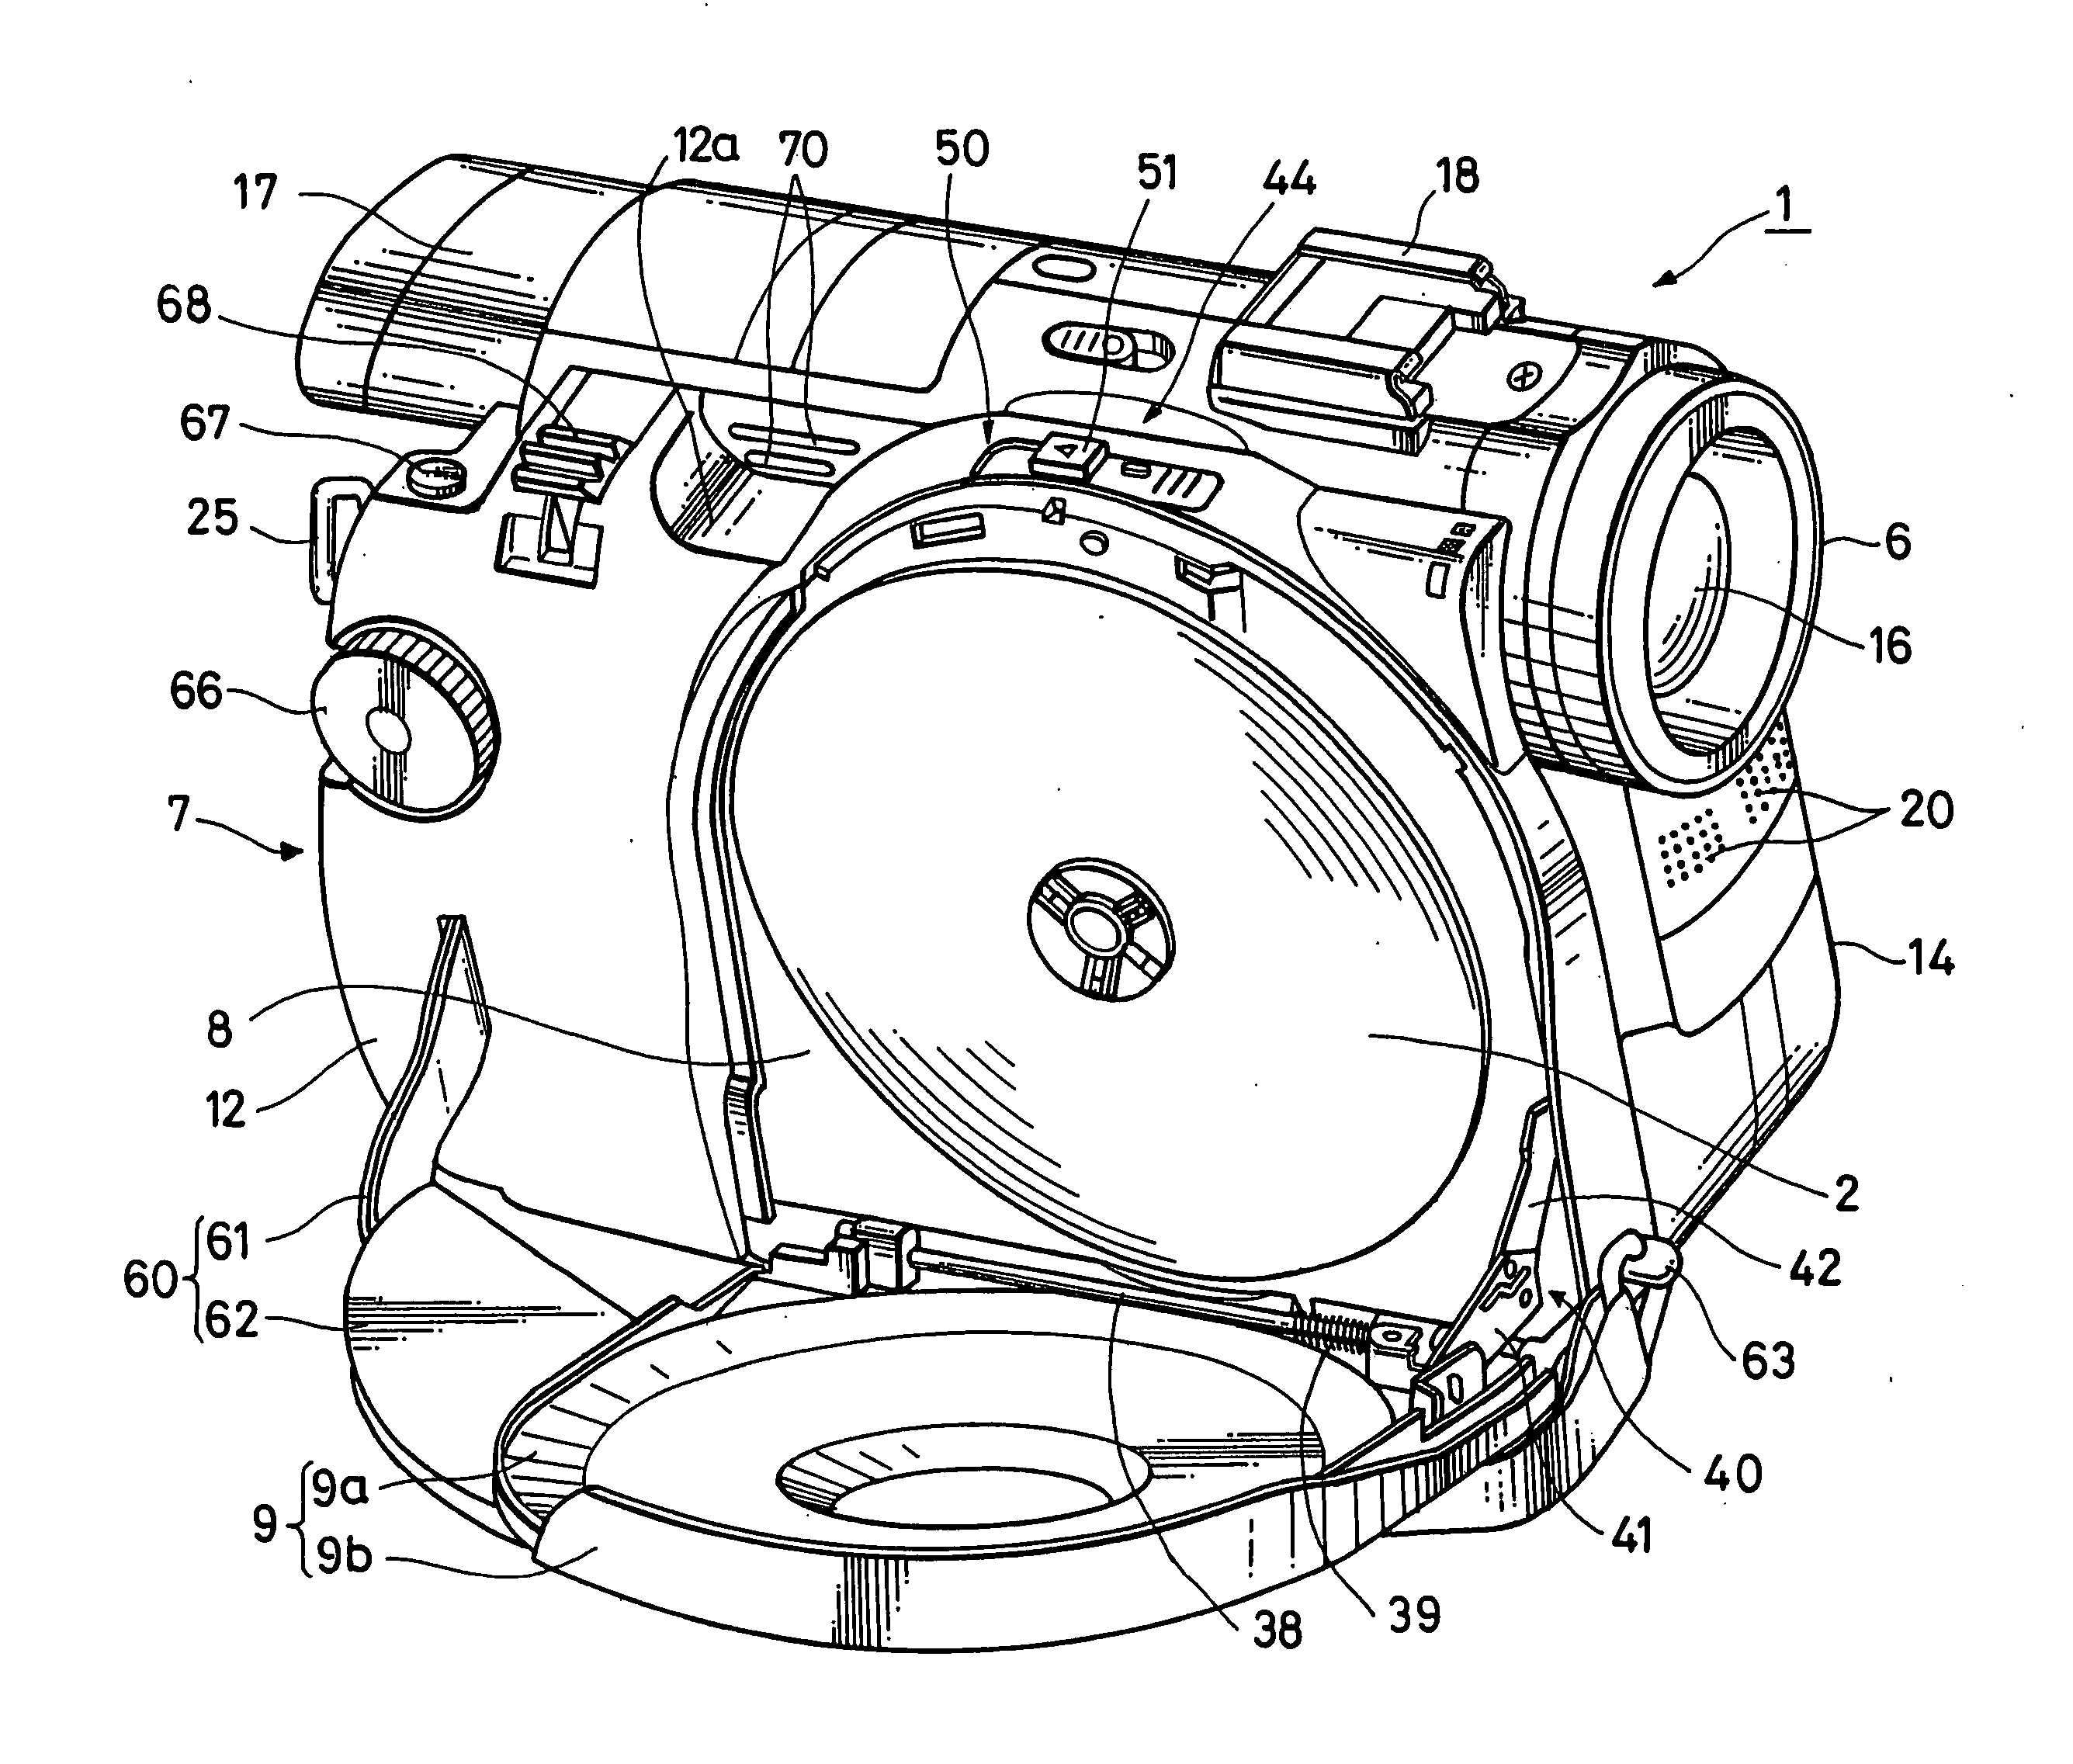 Disc recording and/or reproducing apparatus